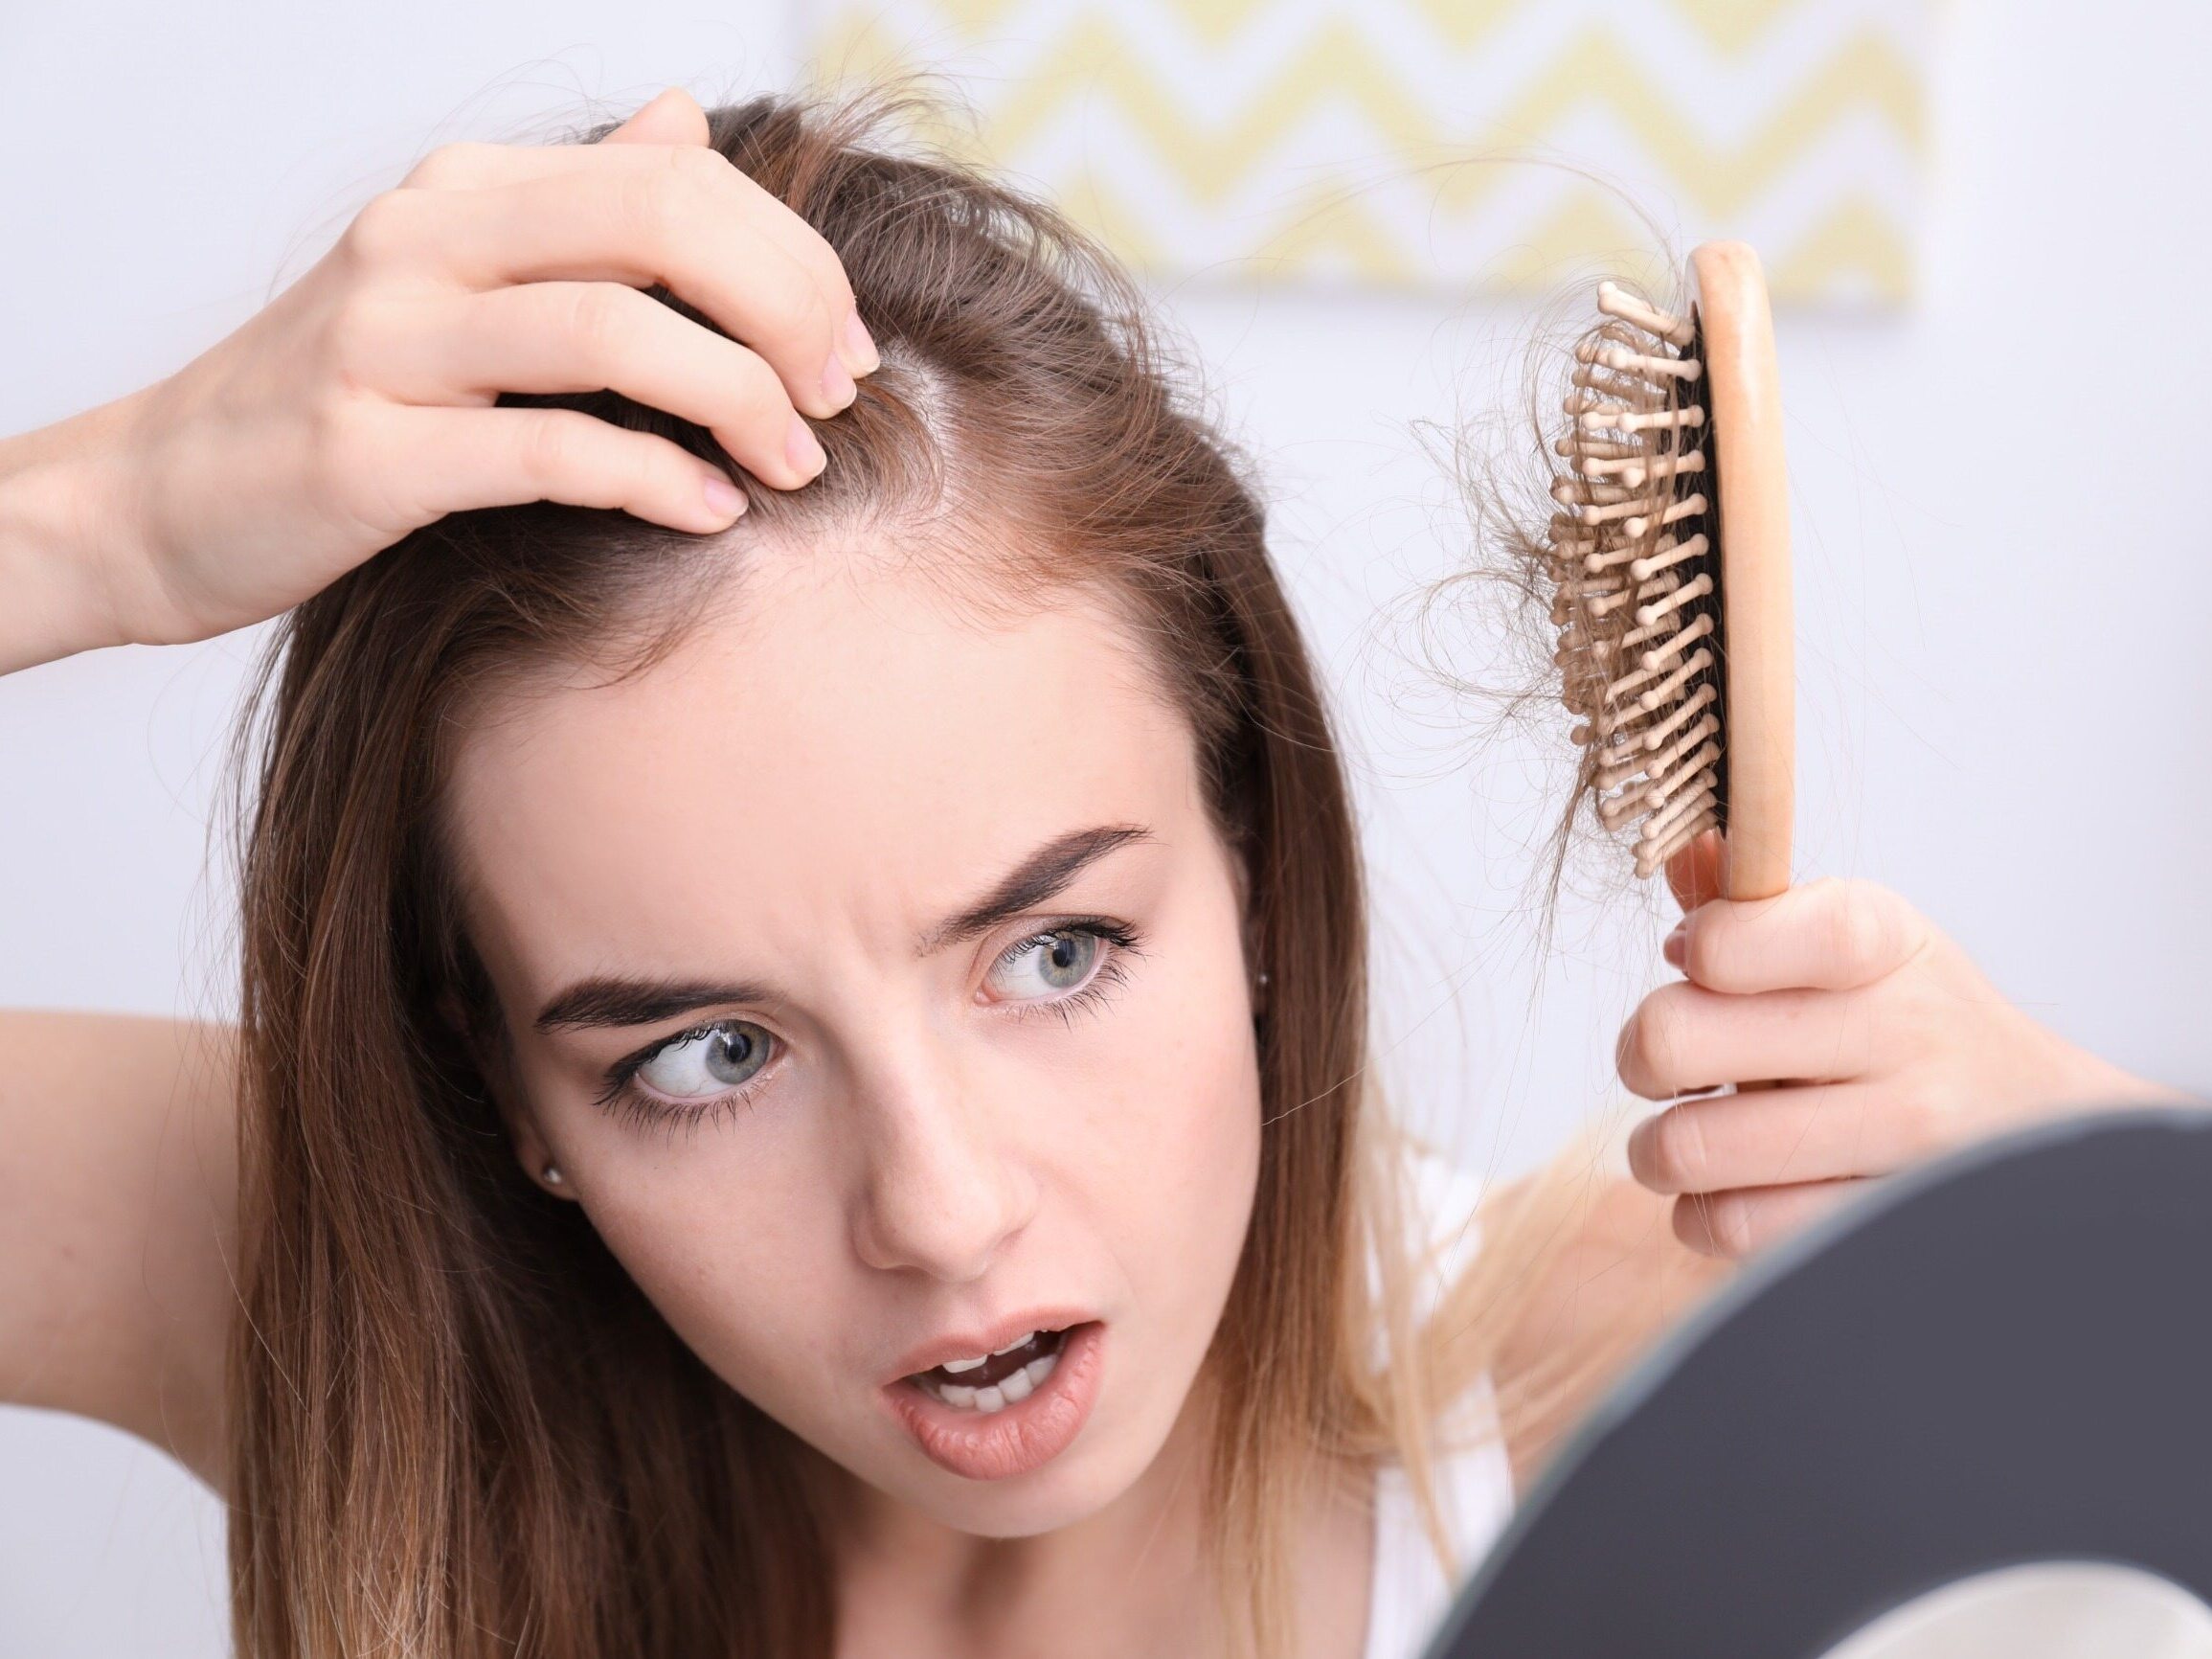 Hair loss is the body's cry for help.  This is a little-known symptom of a dangerous and common disease